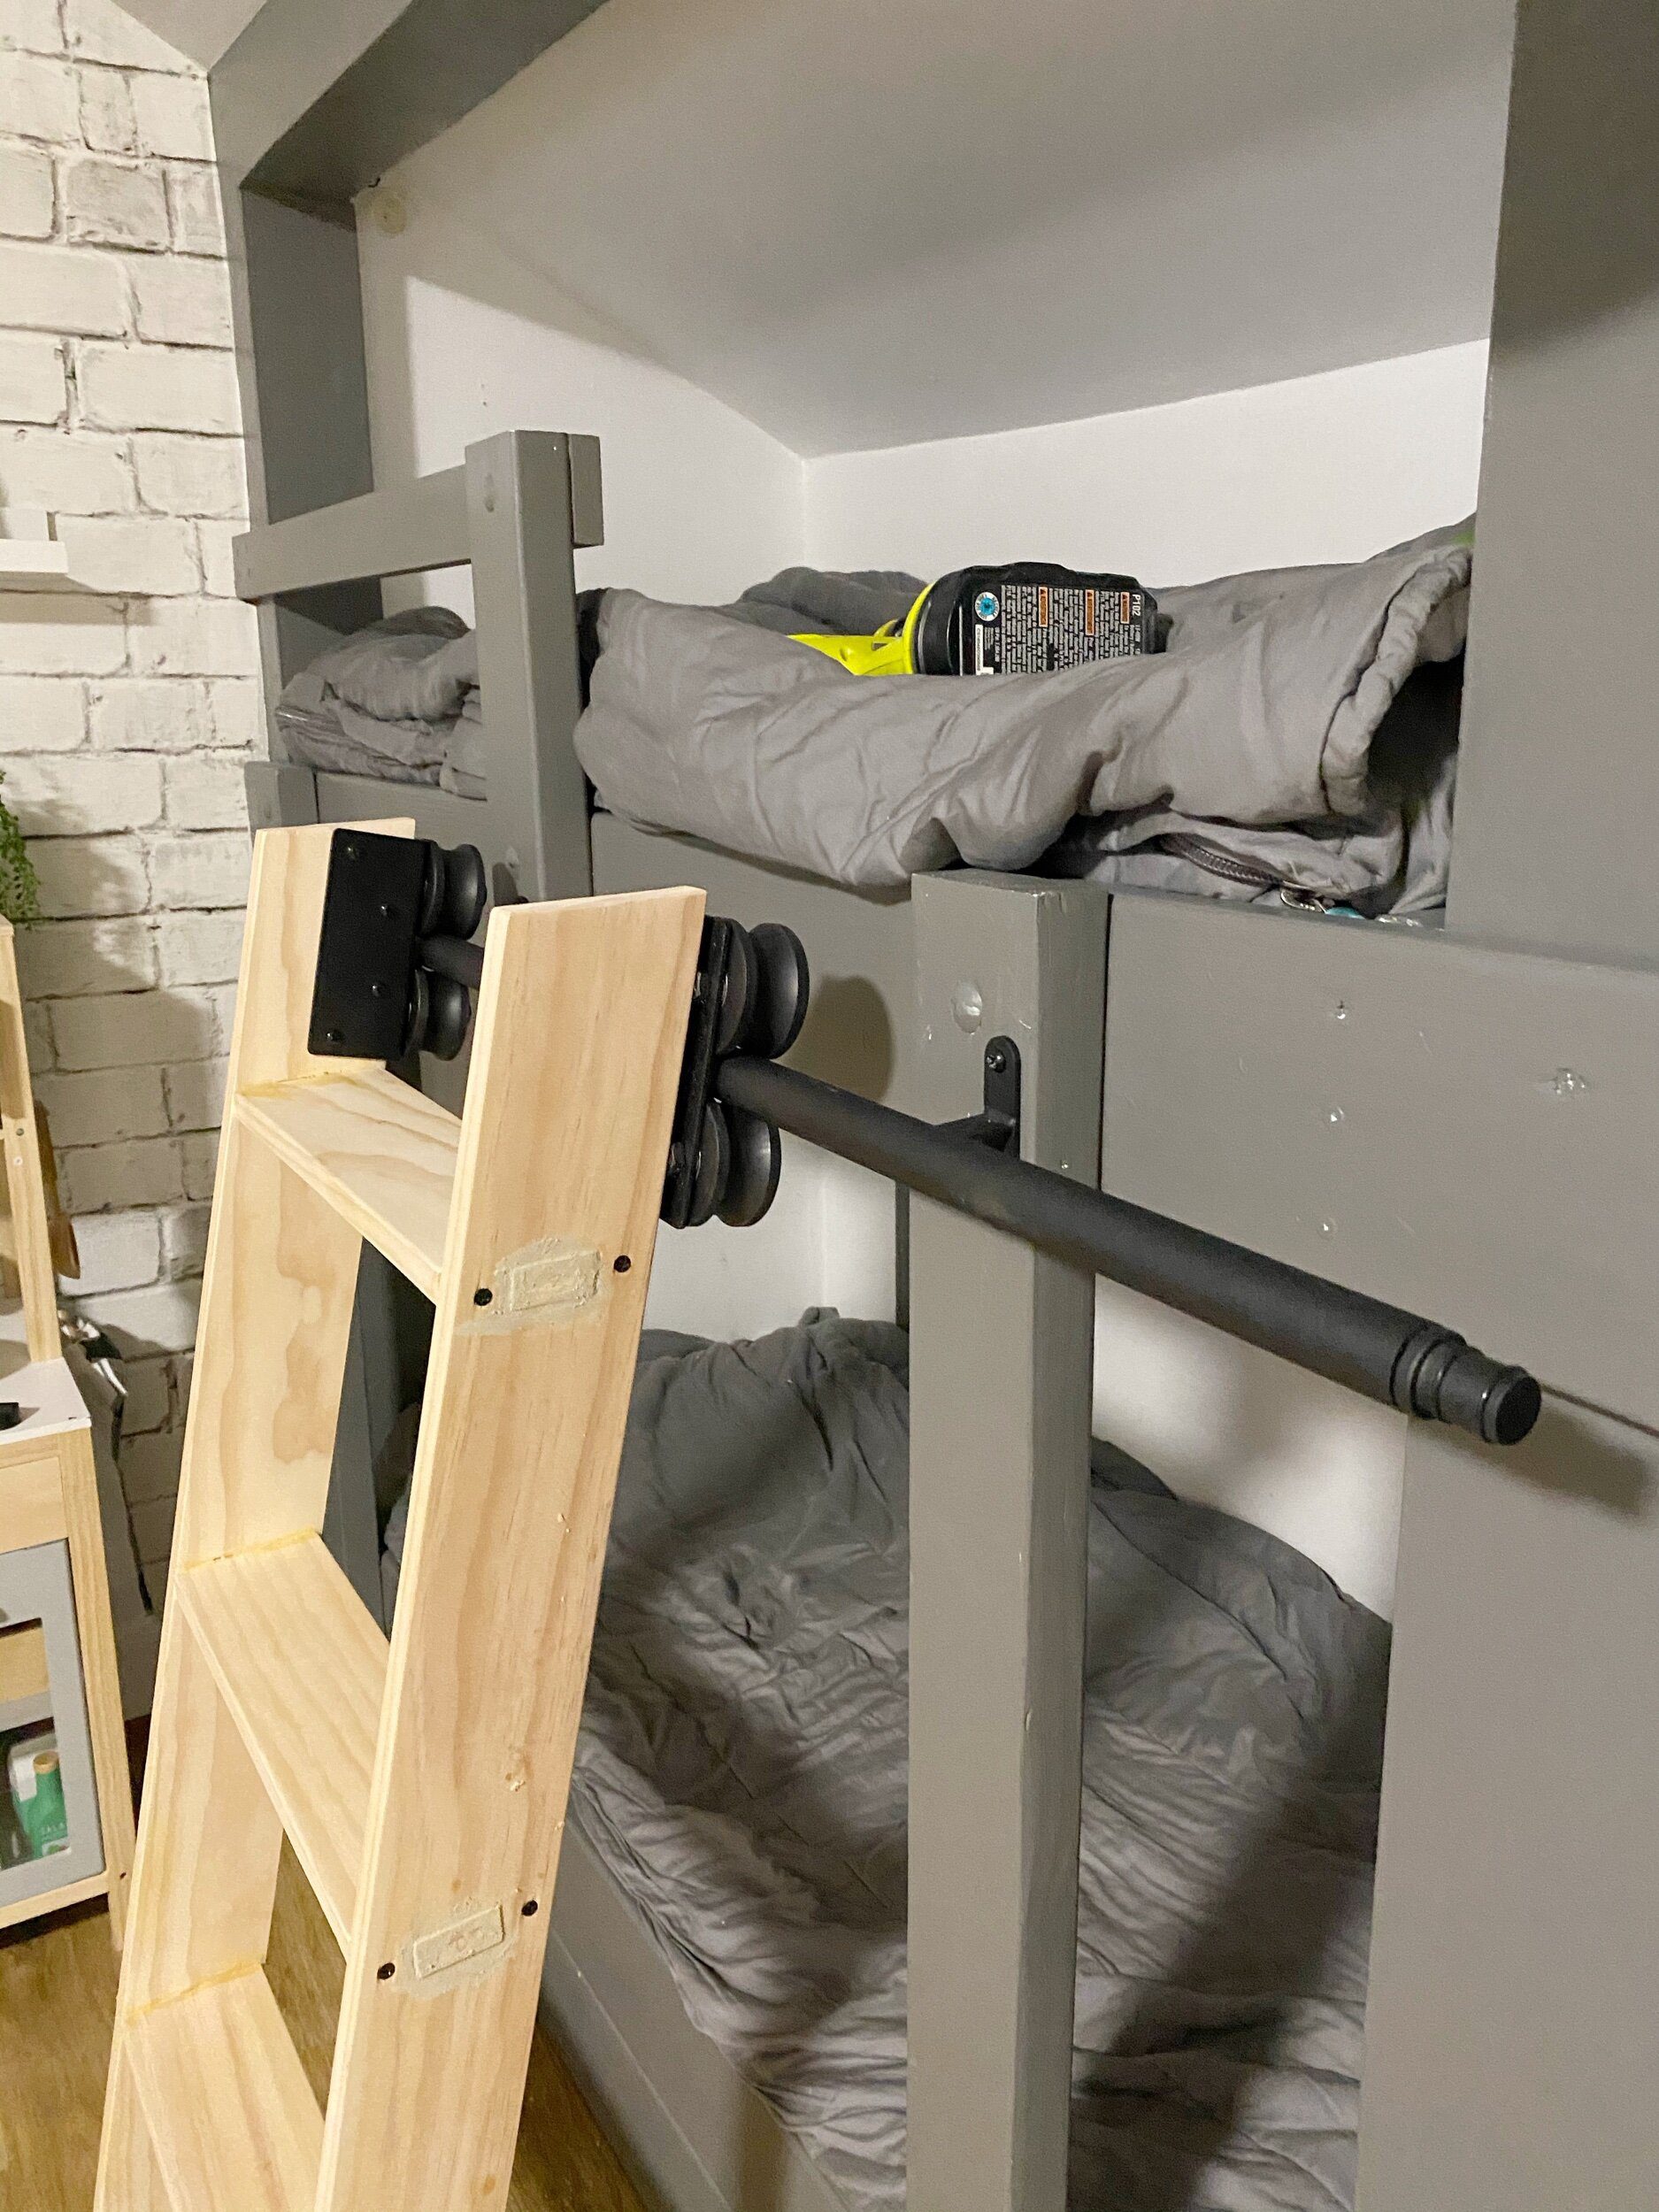 Diy Bunk Bed Library Ladder, Bunk Beds With Ladder